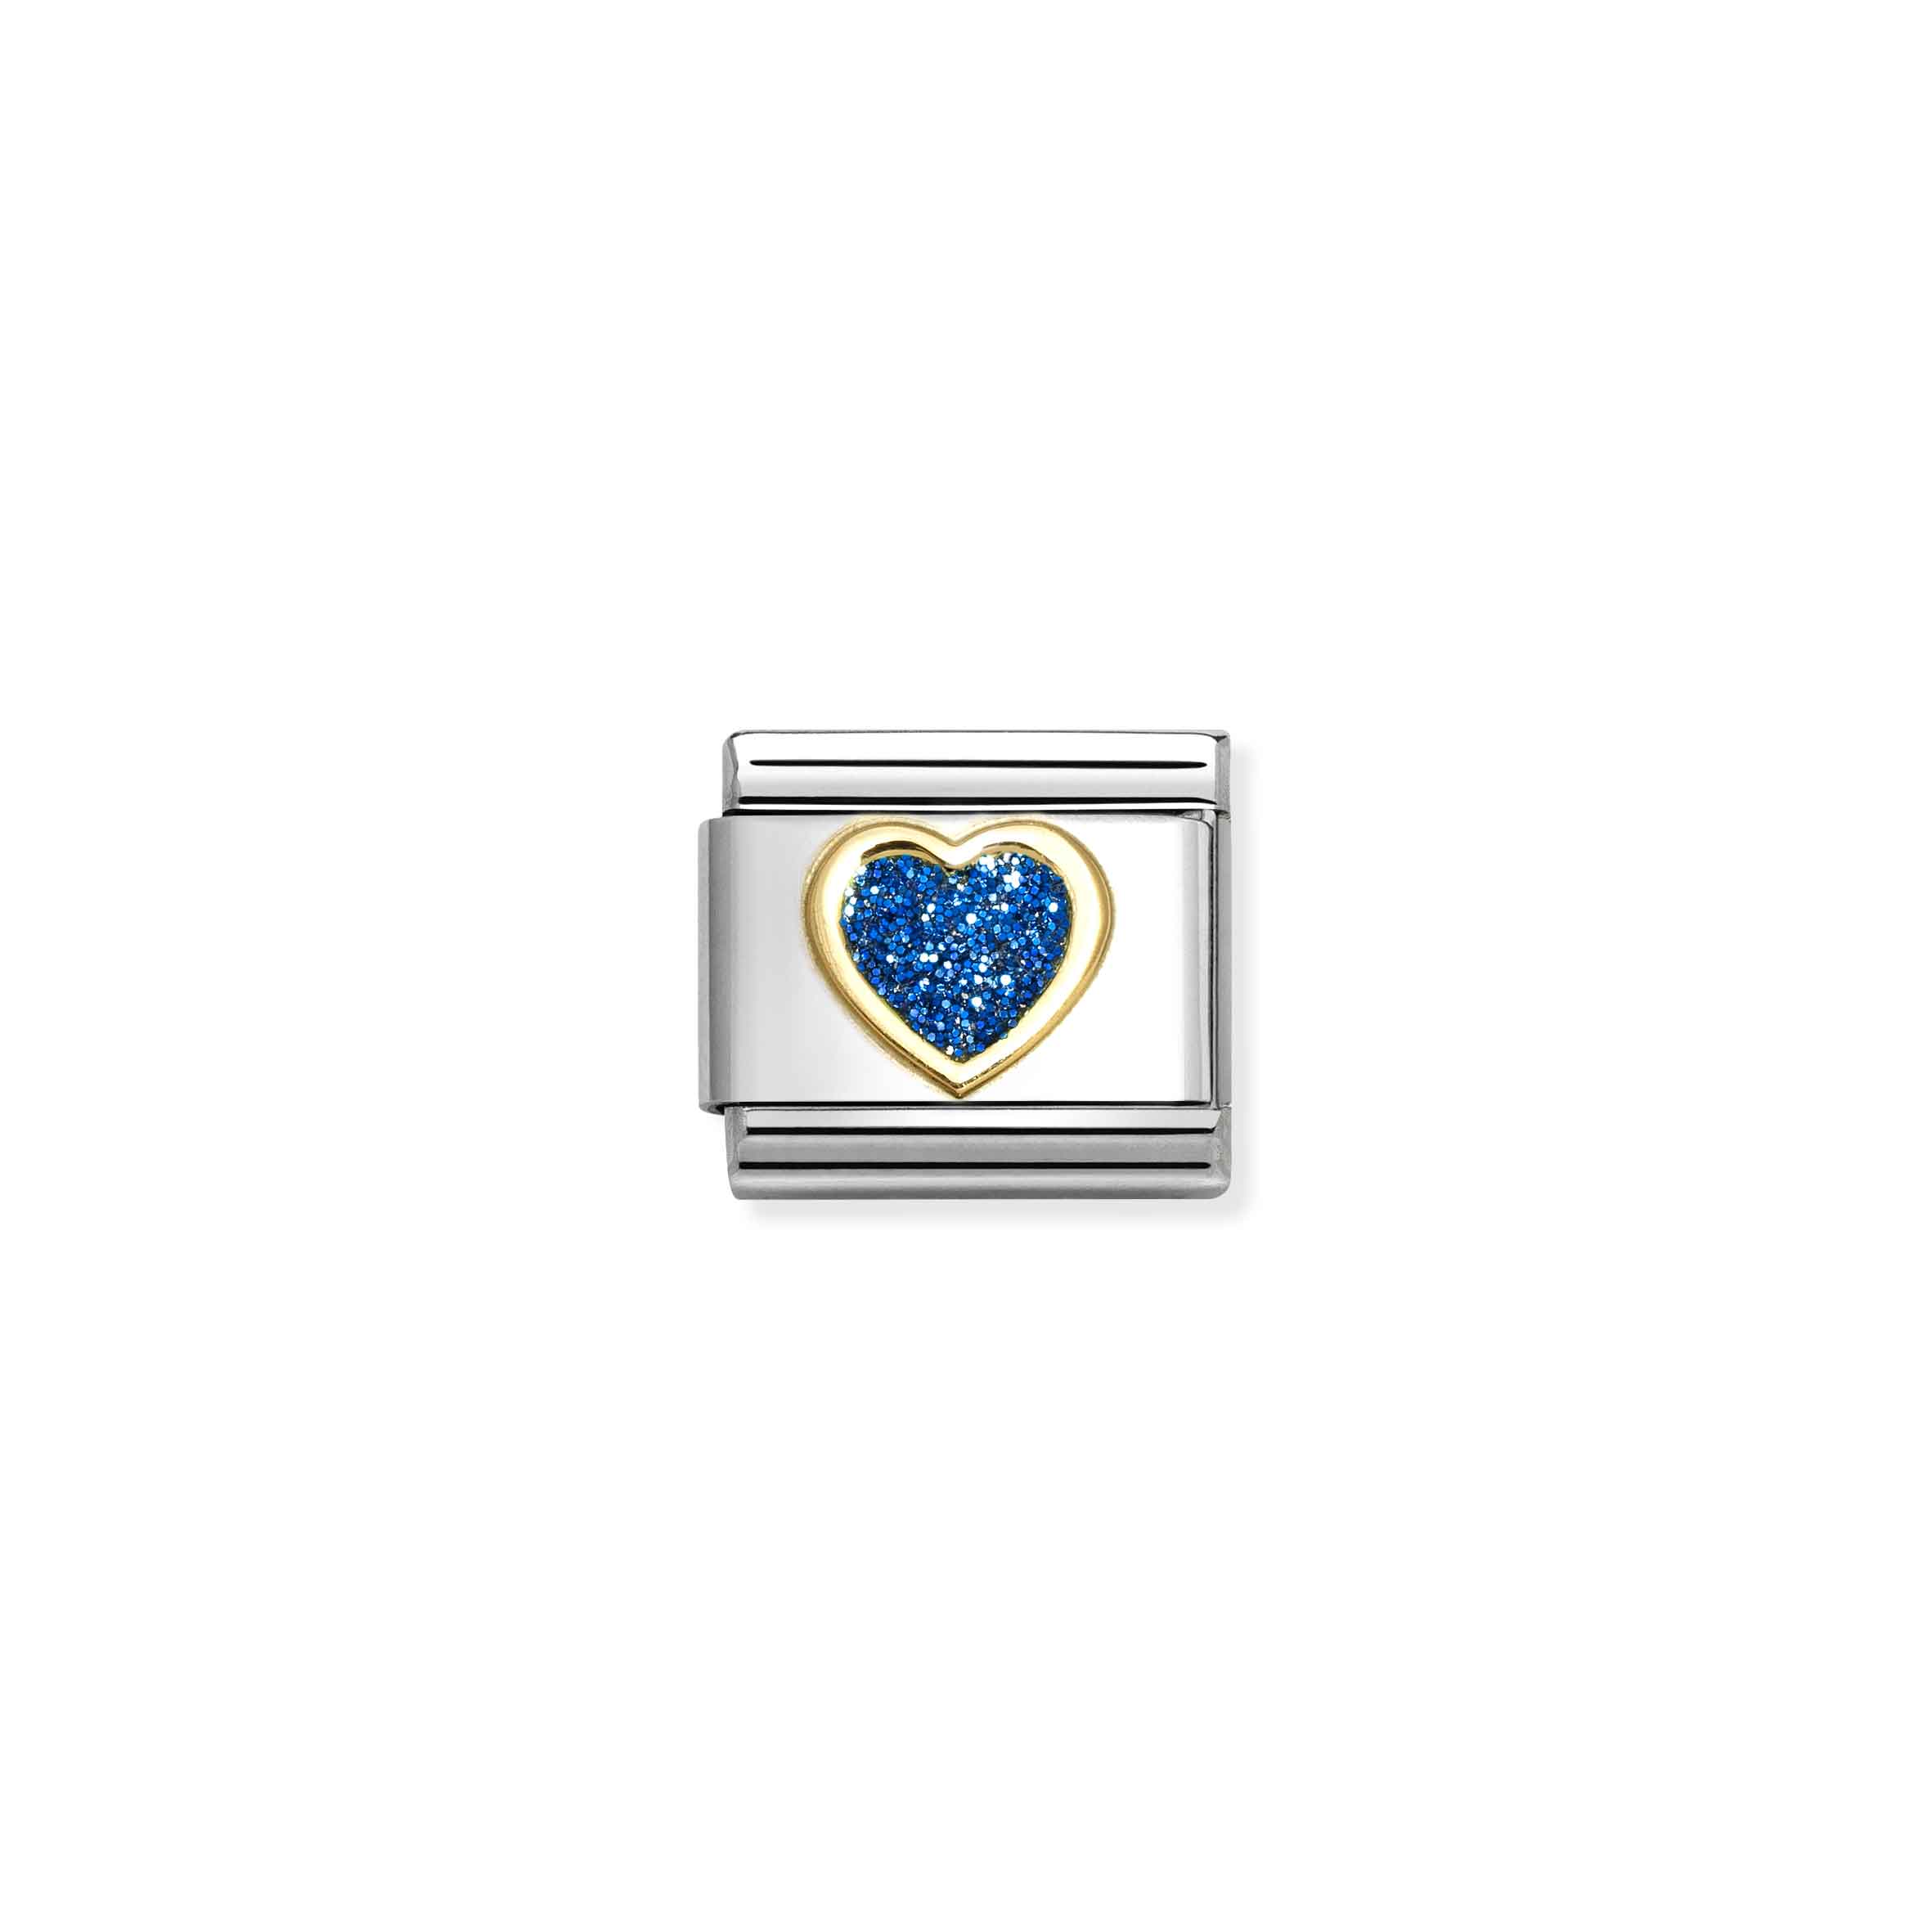 Nomination Gold Blue Glitter Heart Composable Charm